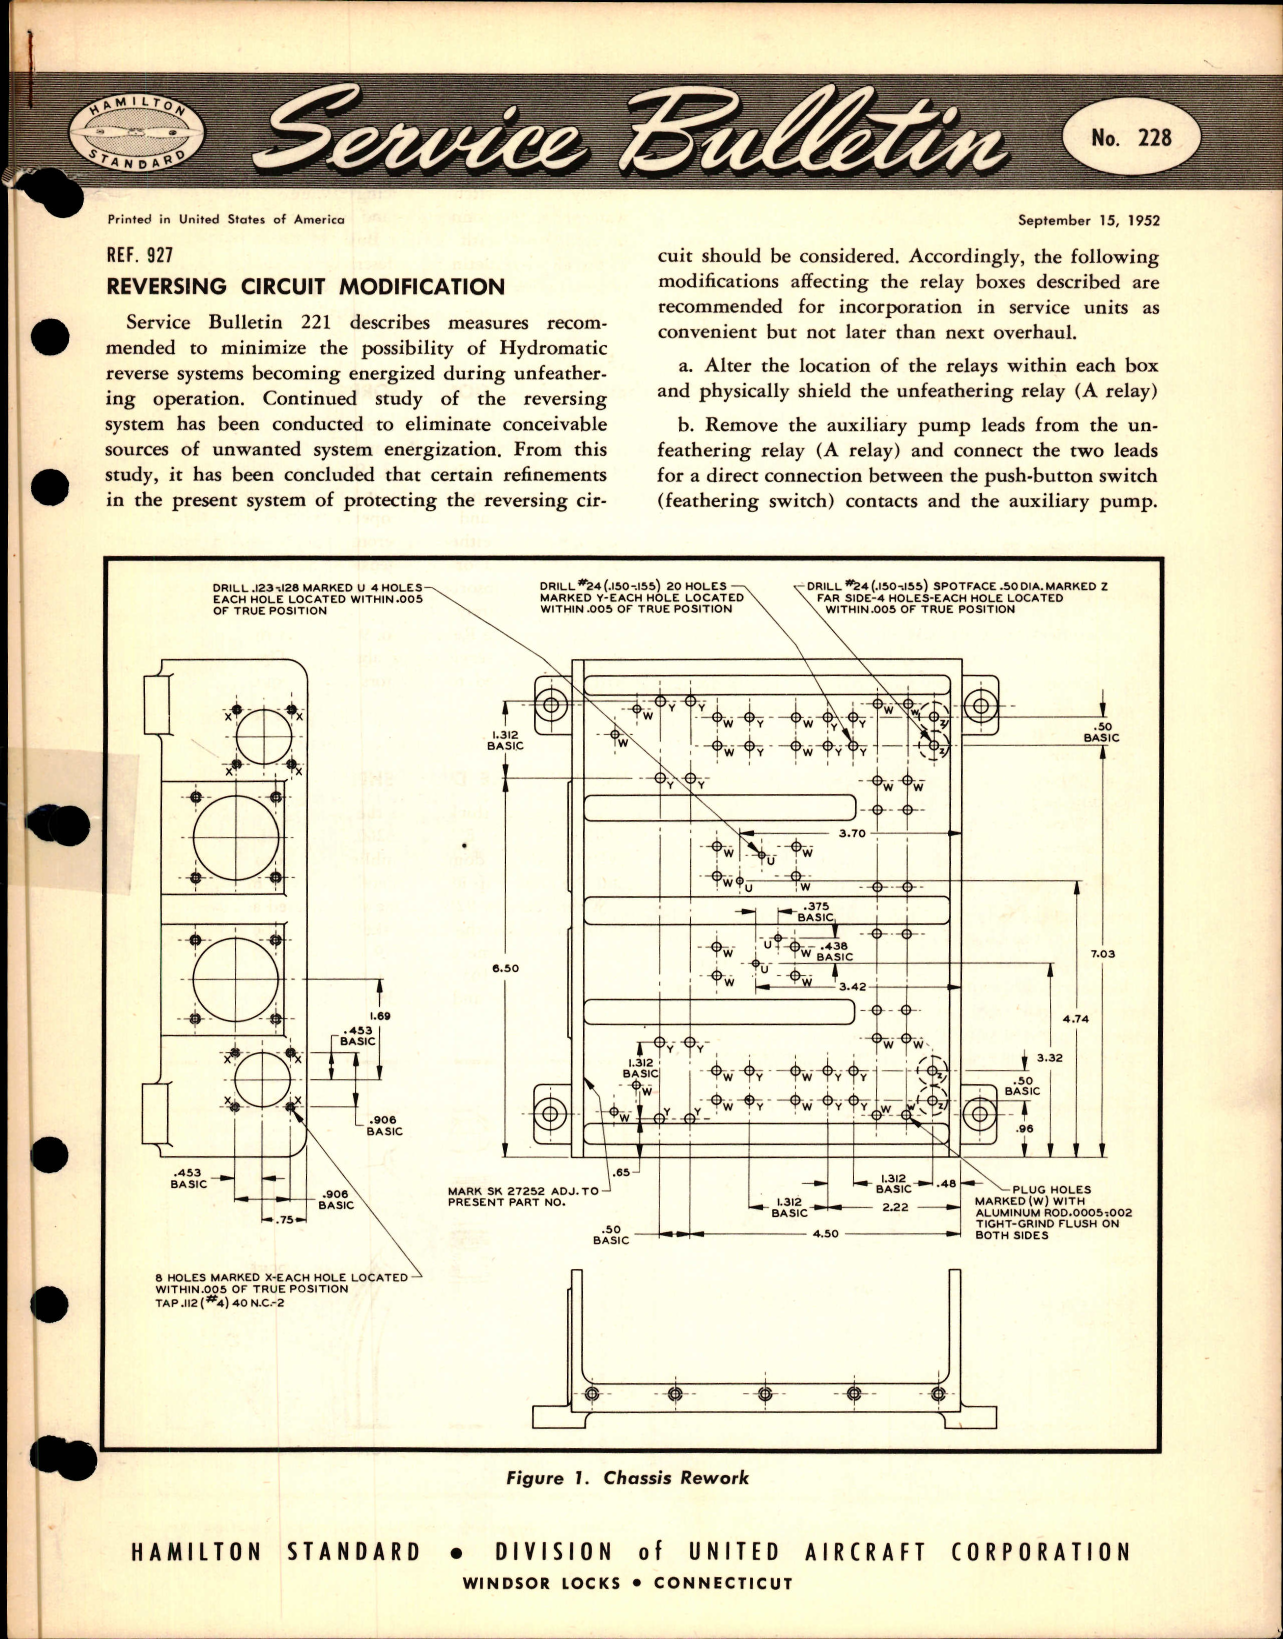 Sample page 1 from AirCorps Library document: Reversing Circuit Modification, Ref 927